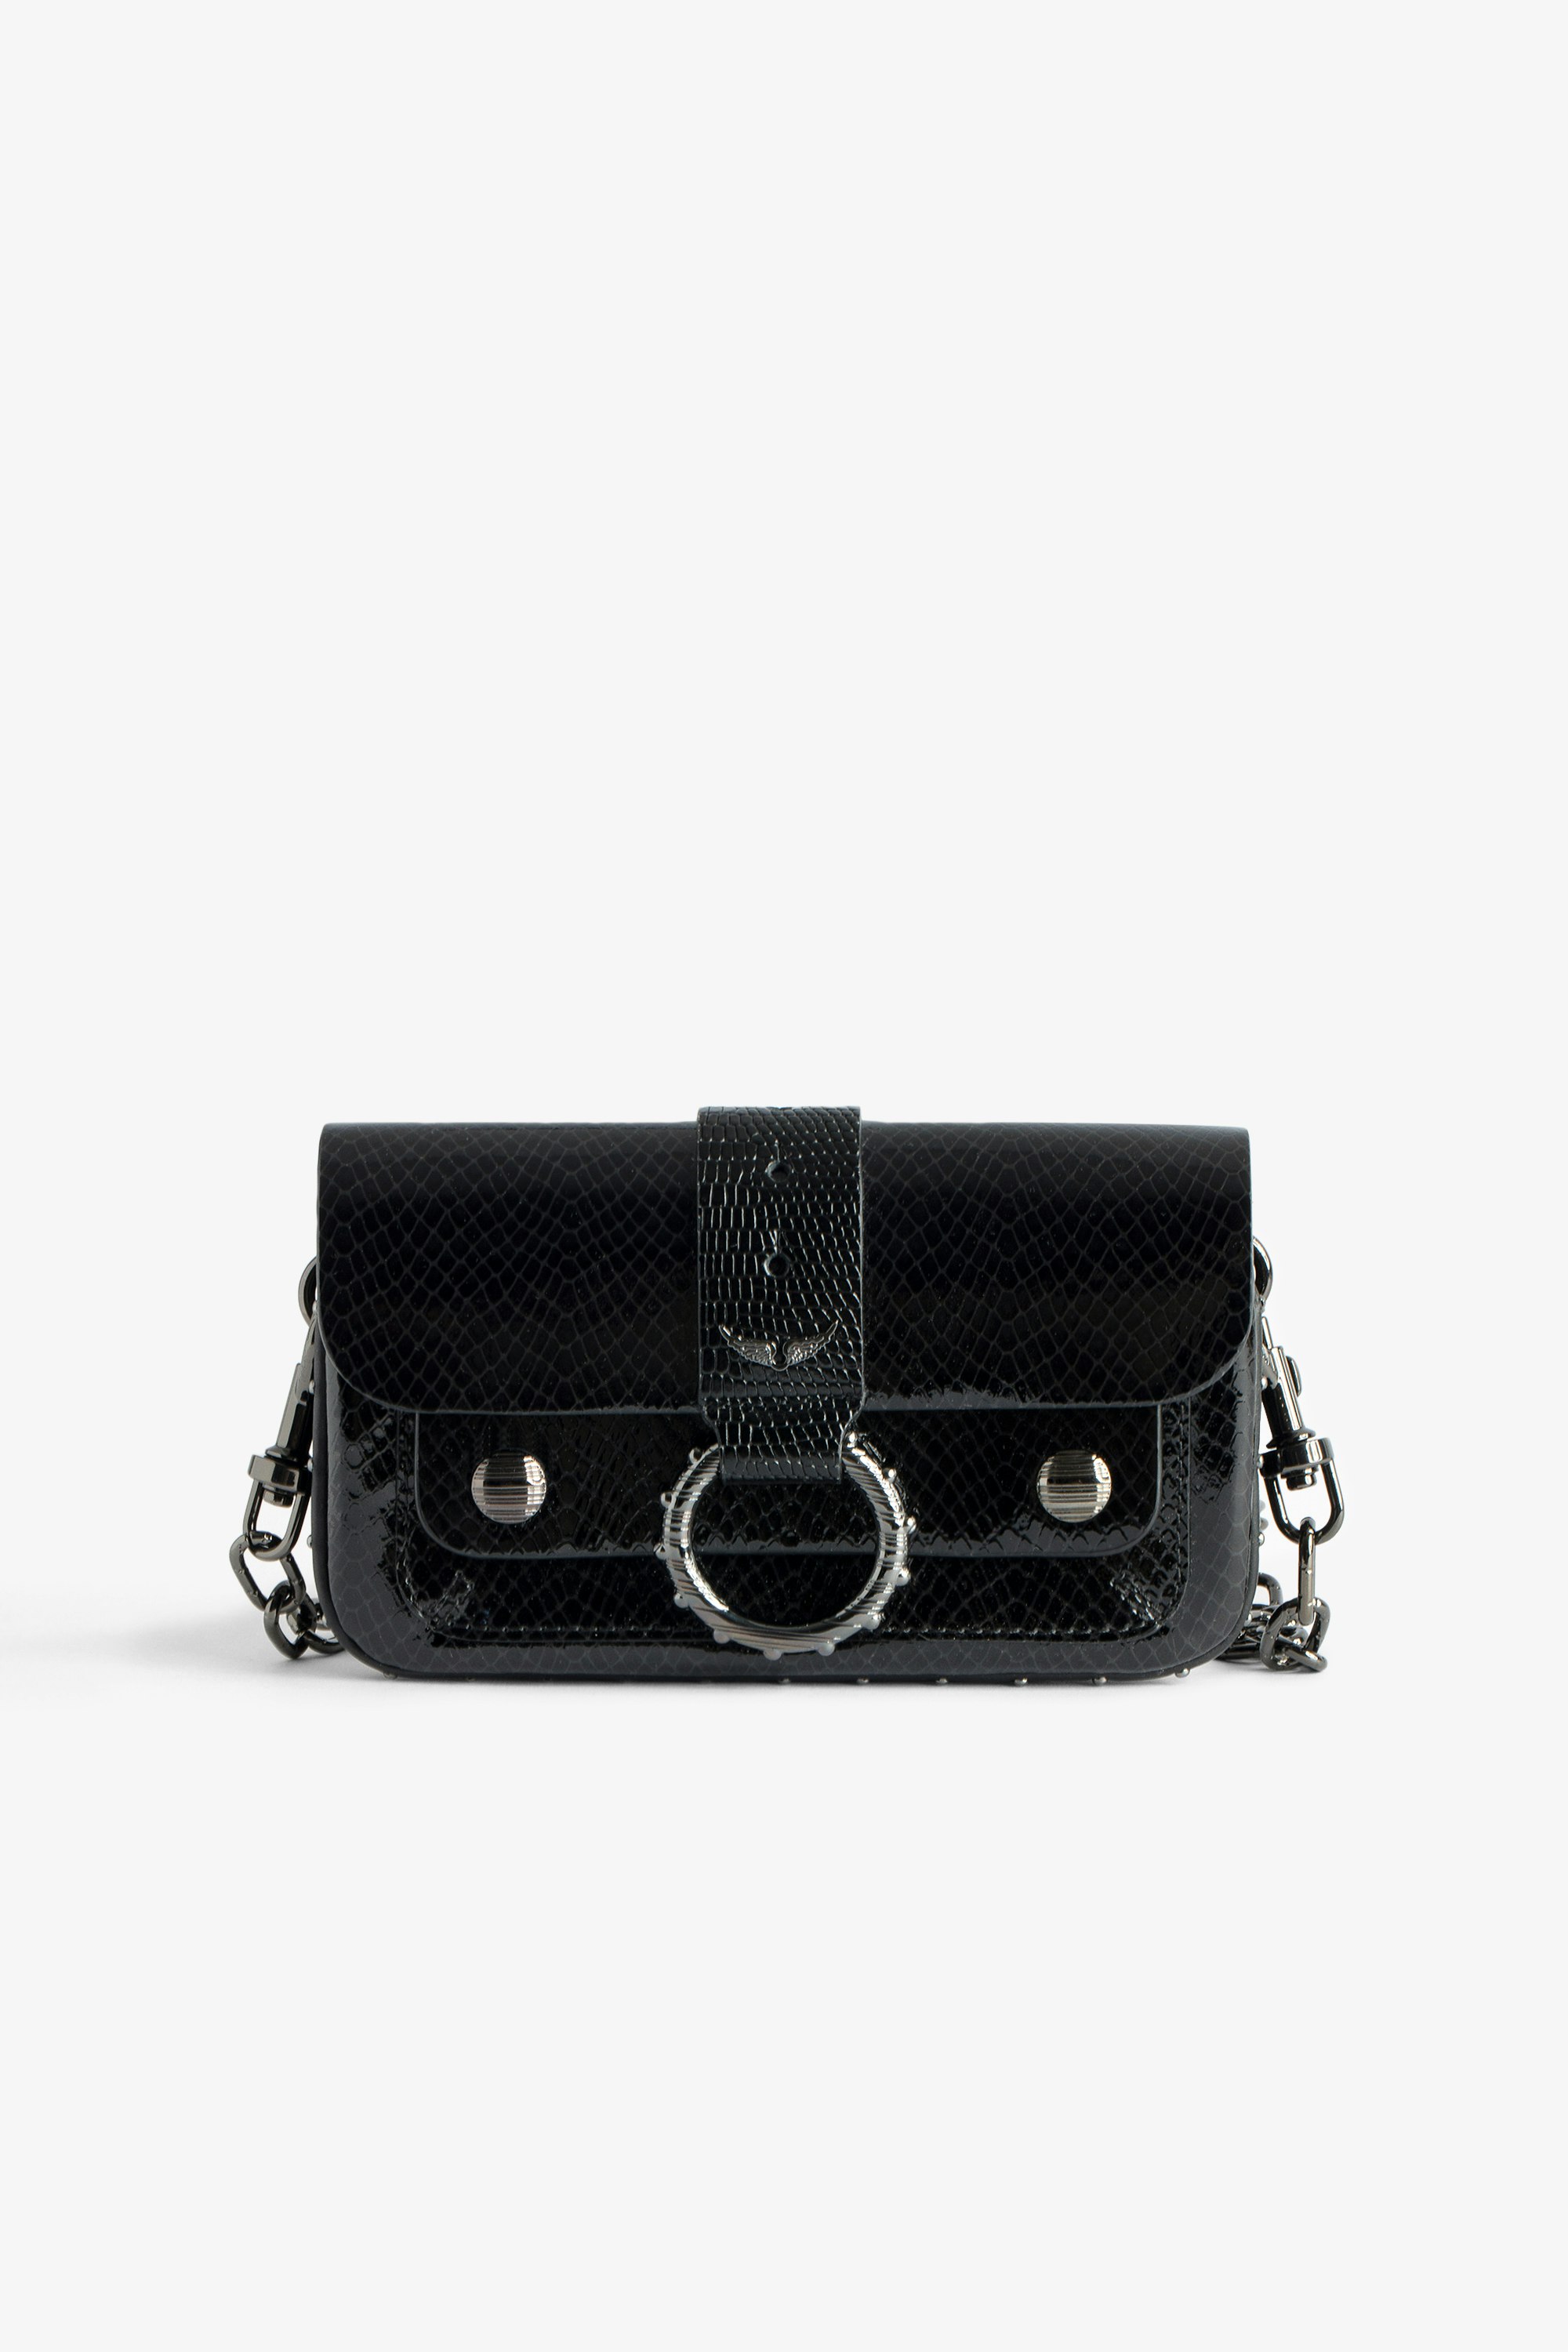 Kate Wallet Glossy Wild Embossed Bag Women’s black iguana-embossed patent leather mini bag with metal chain.